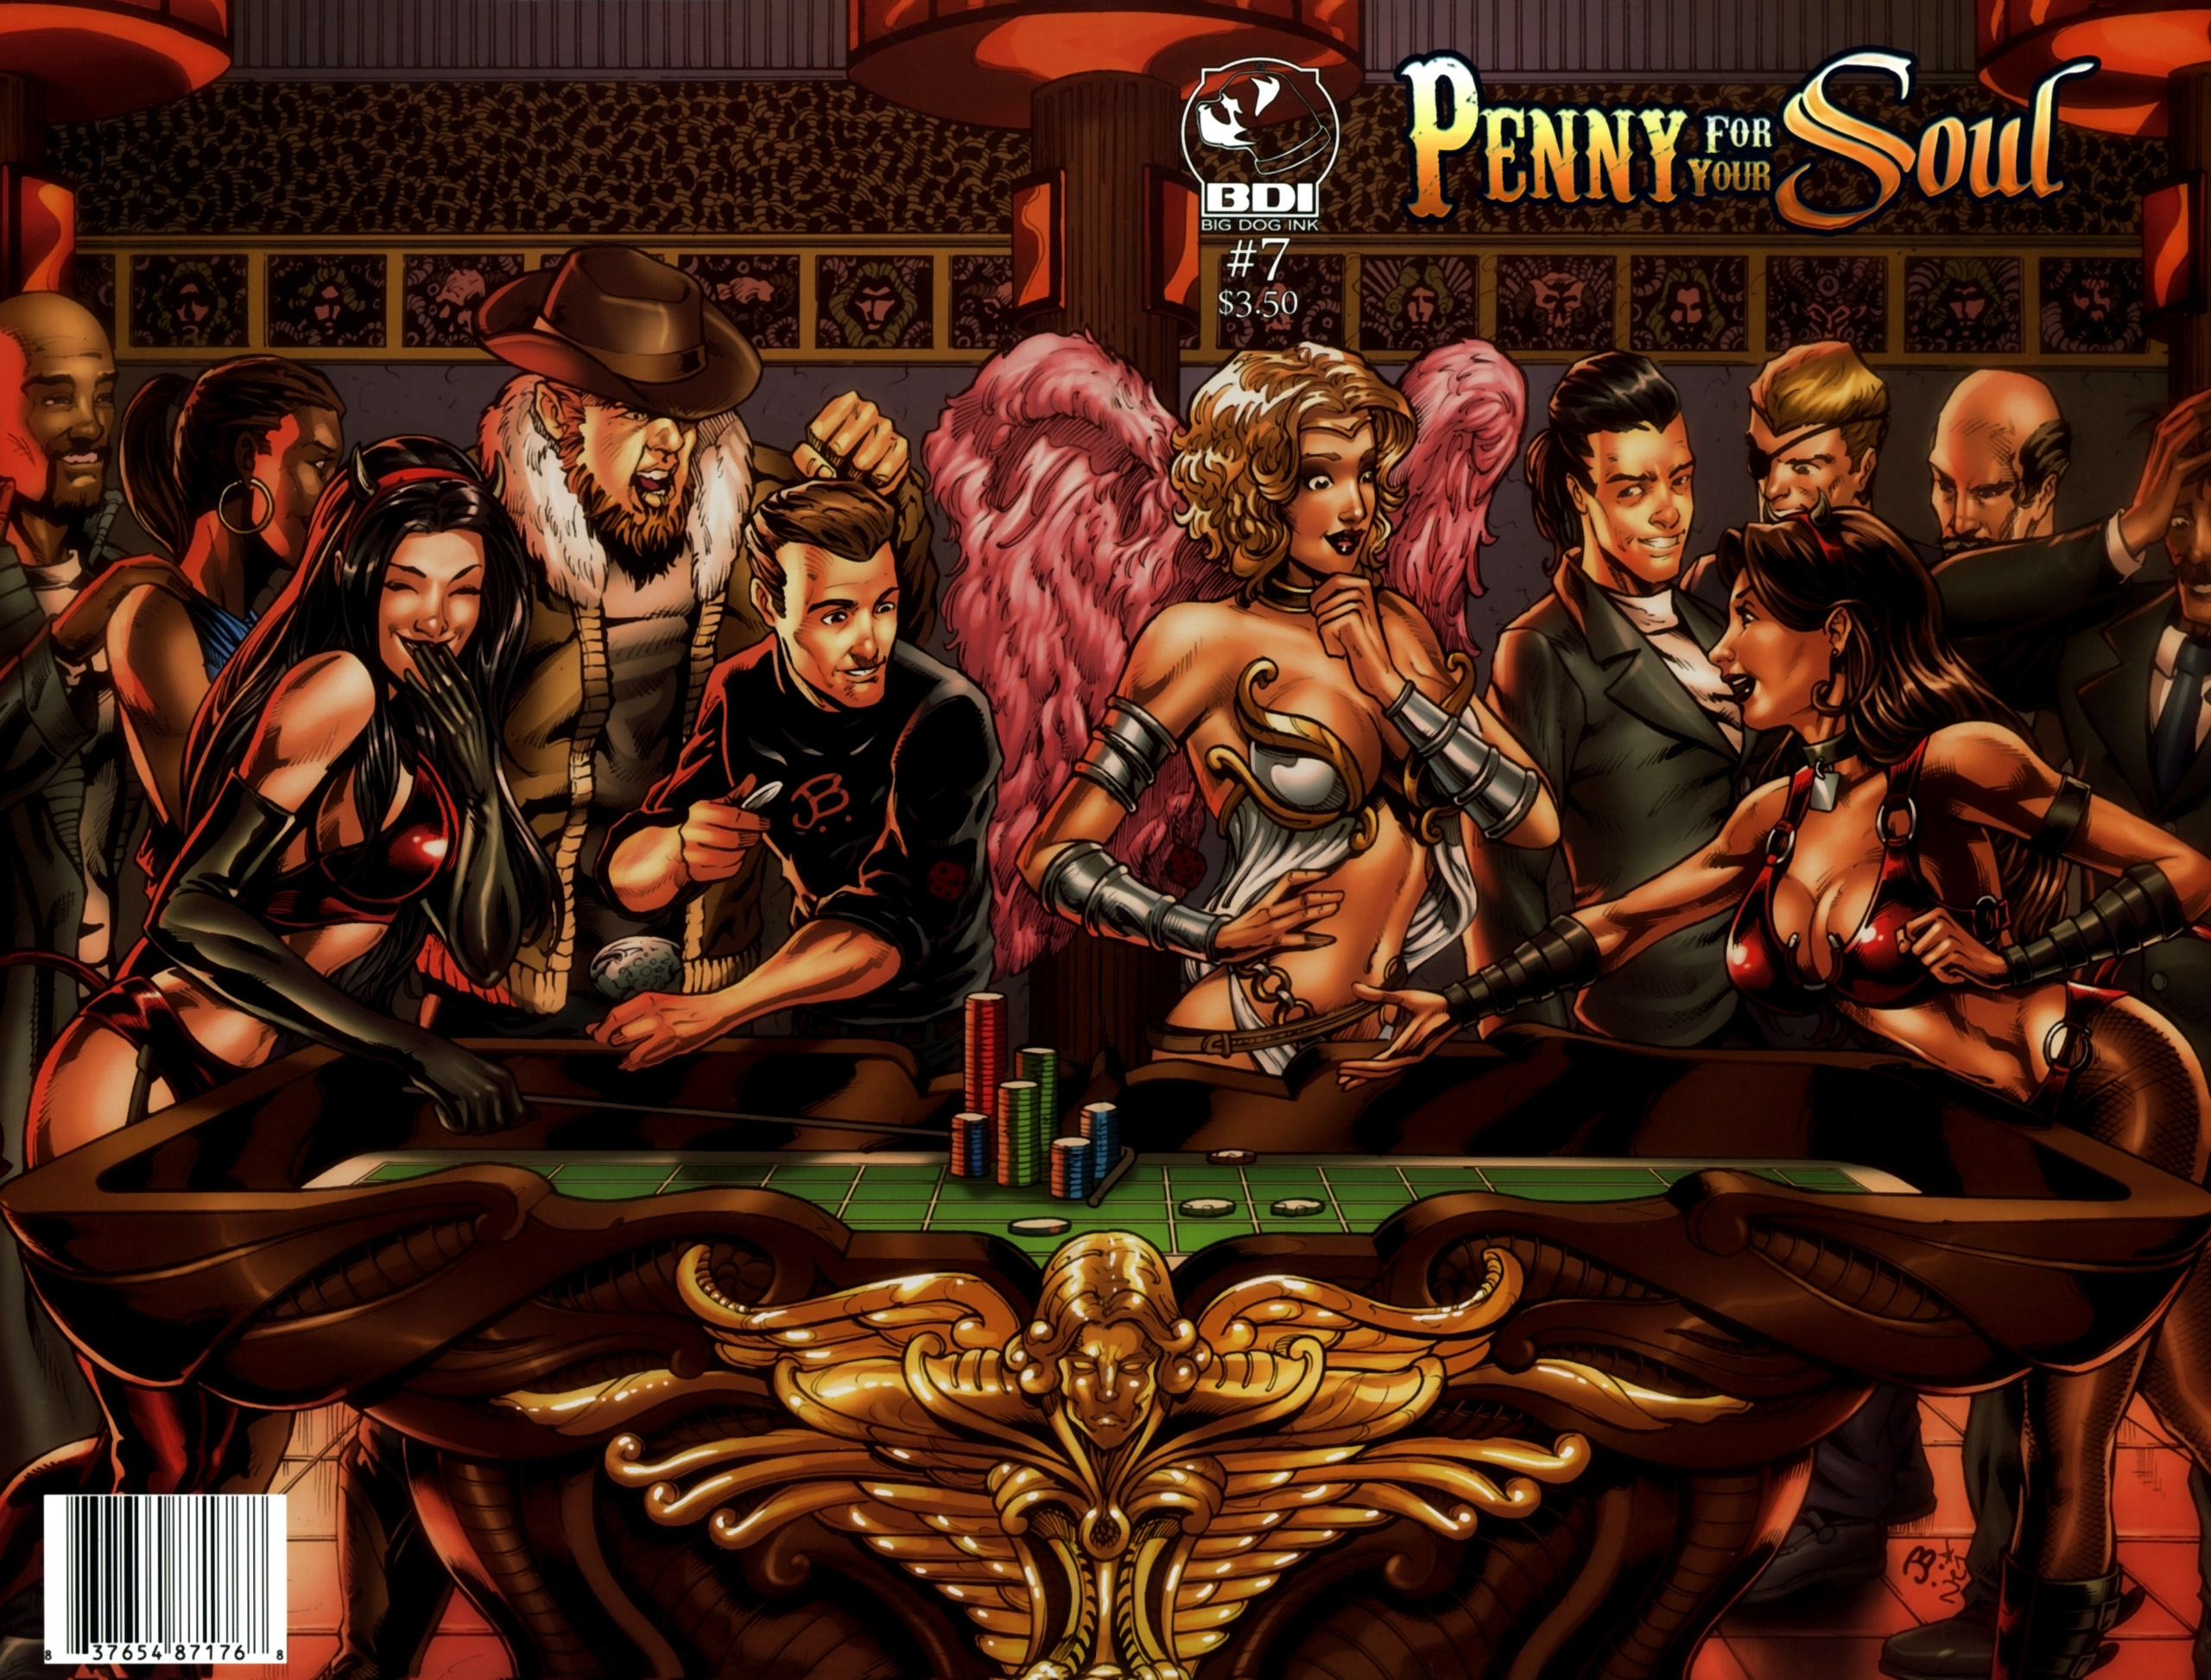 Read online Penny for Your Soul (2010) comic -  Issue #7 - 1